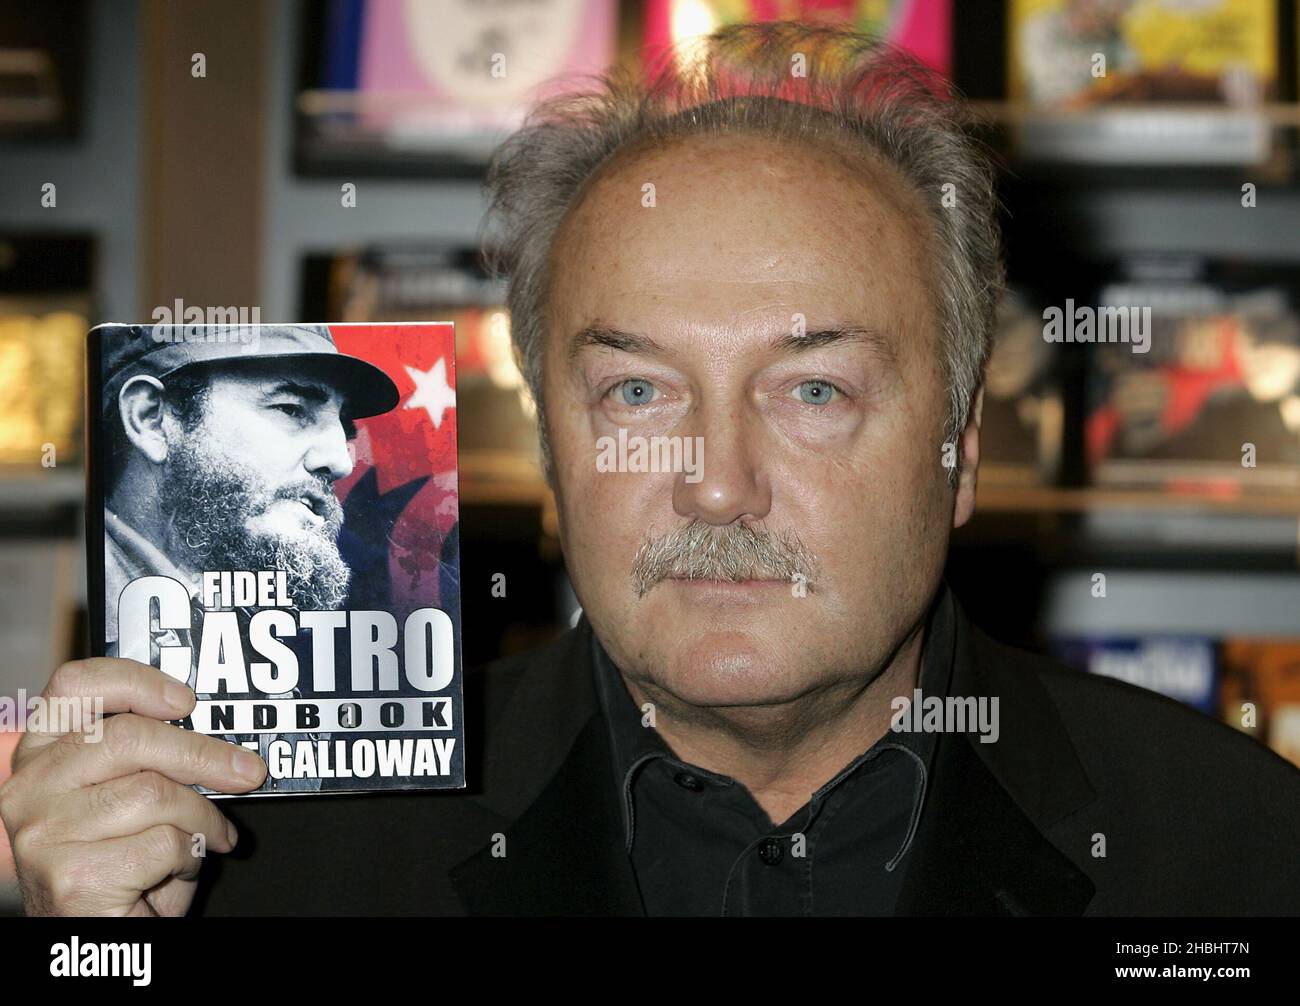 Respect MP George Galloway promotes publication of Fidel Castro about the Cuban revolution and the man behind it, at the London Book Fair at ExCeL in London. Stock Photo